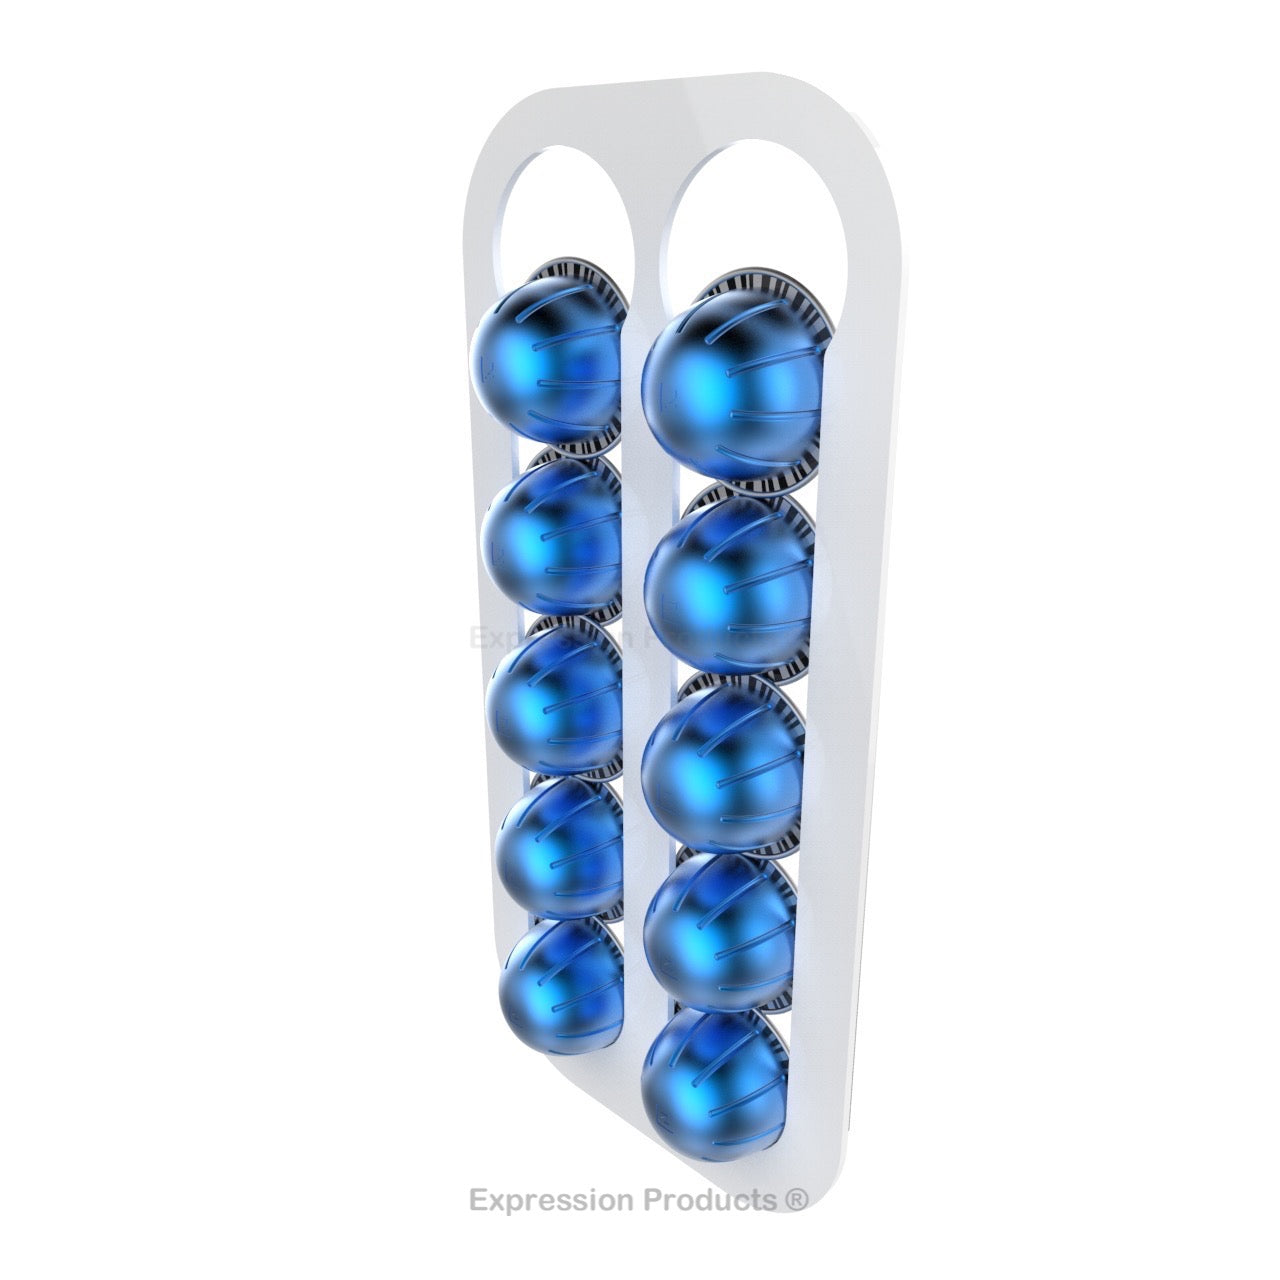 Nespresso Vertuo Coffee Pod Holder - Wall Mounted - Expression Products Ltd